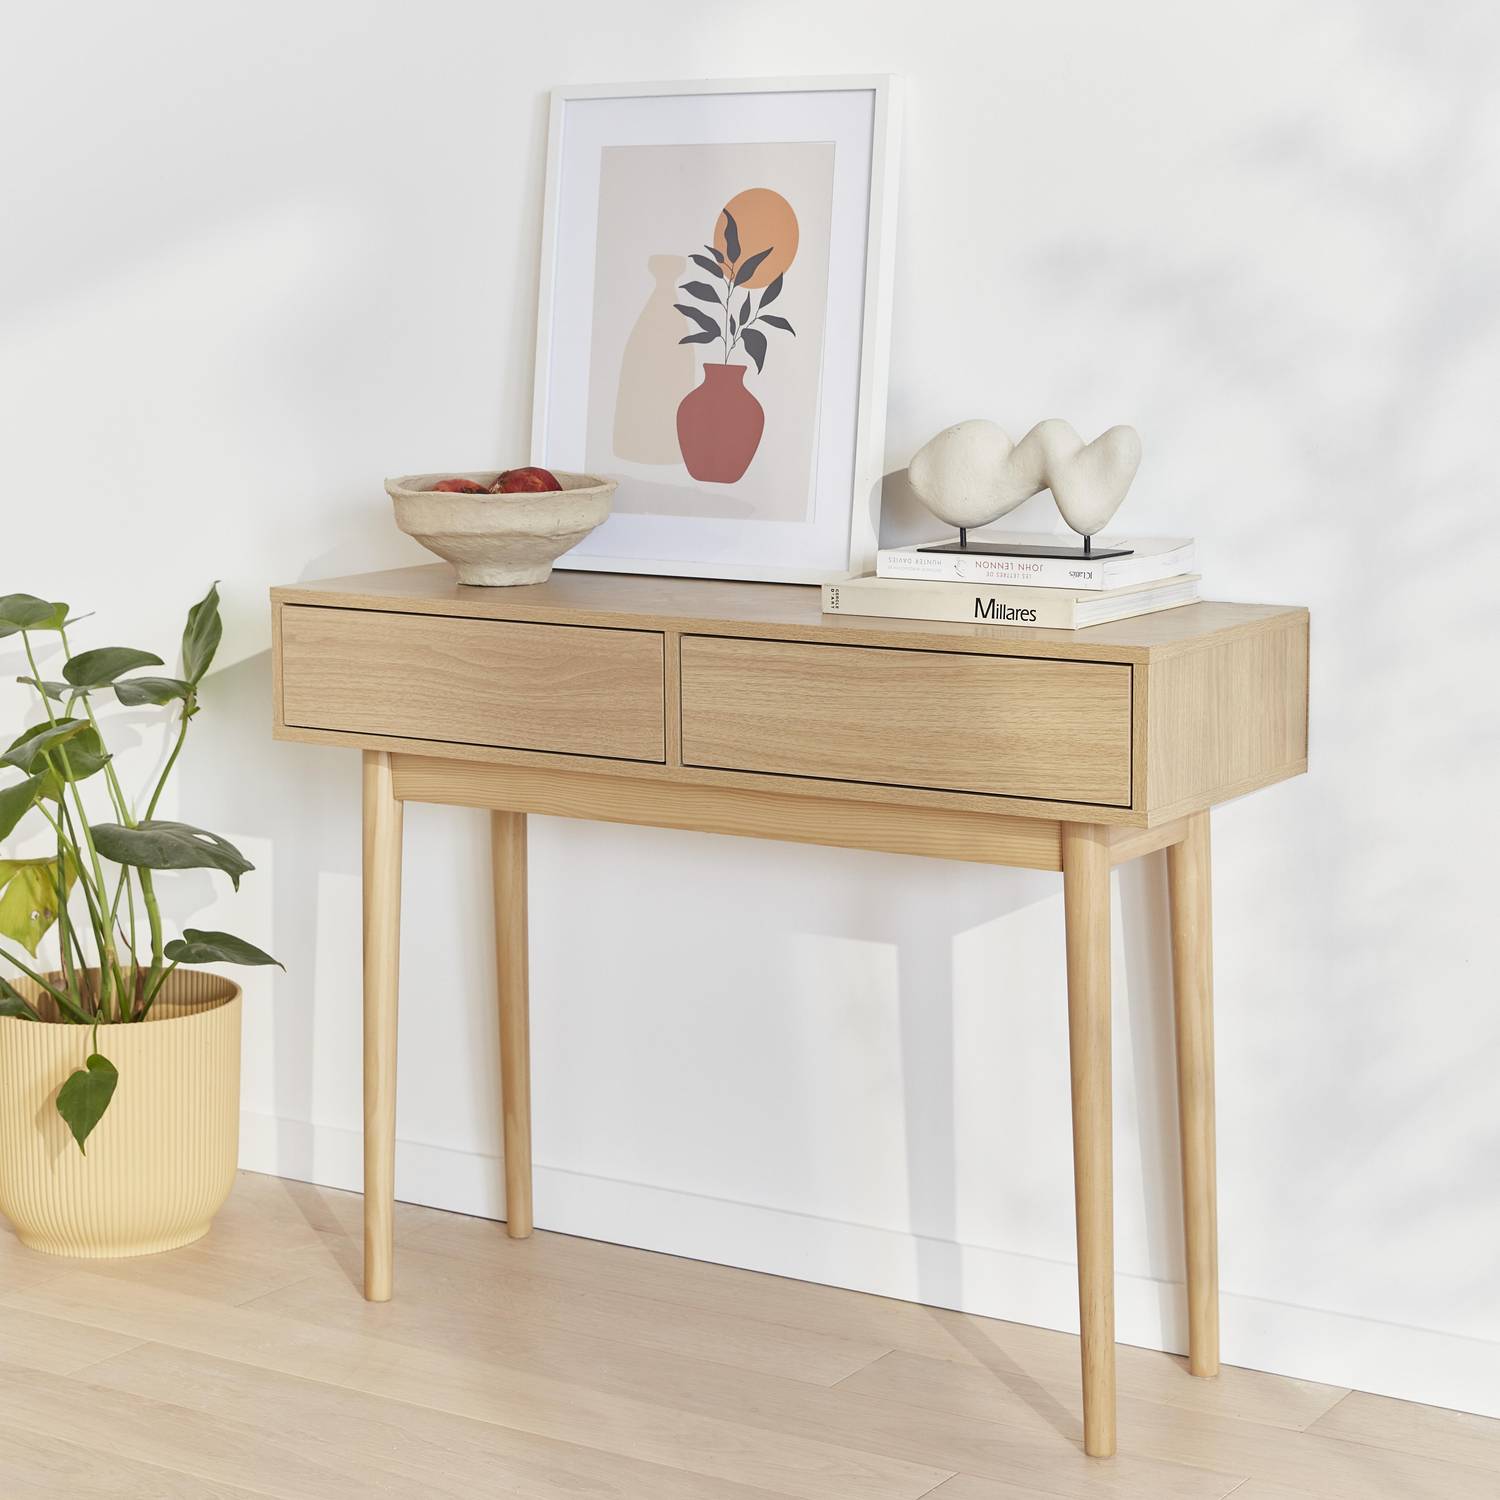 Wood-effect console table, 100x55x75cm, Mika, Natural wood colour Photo2